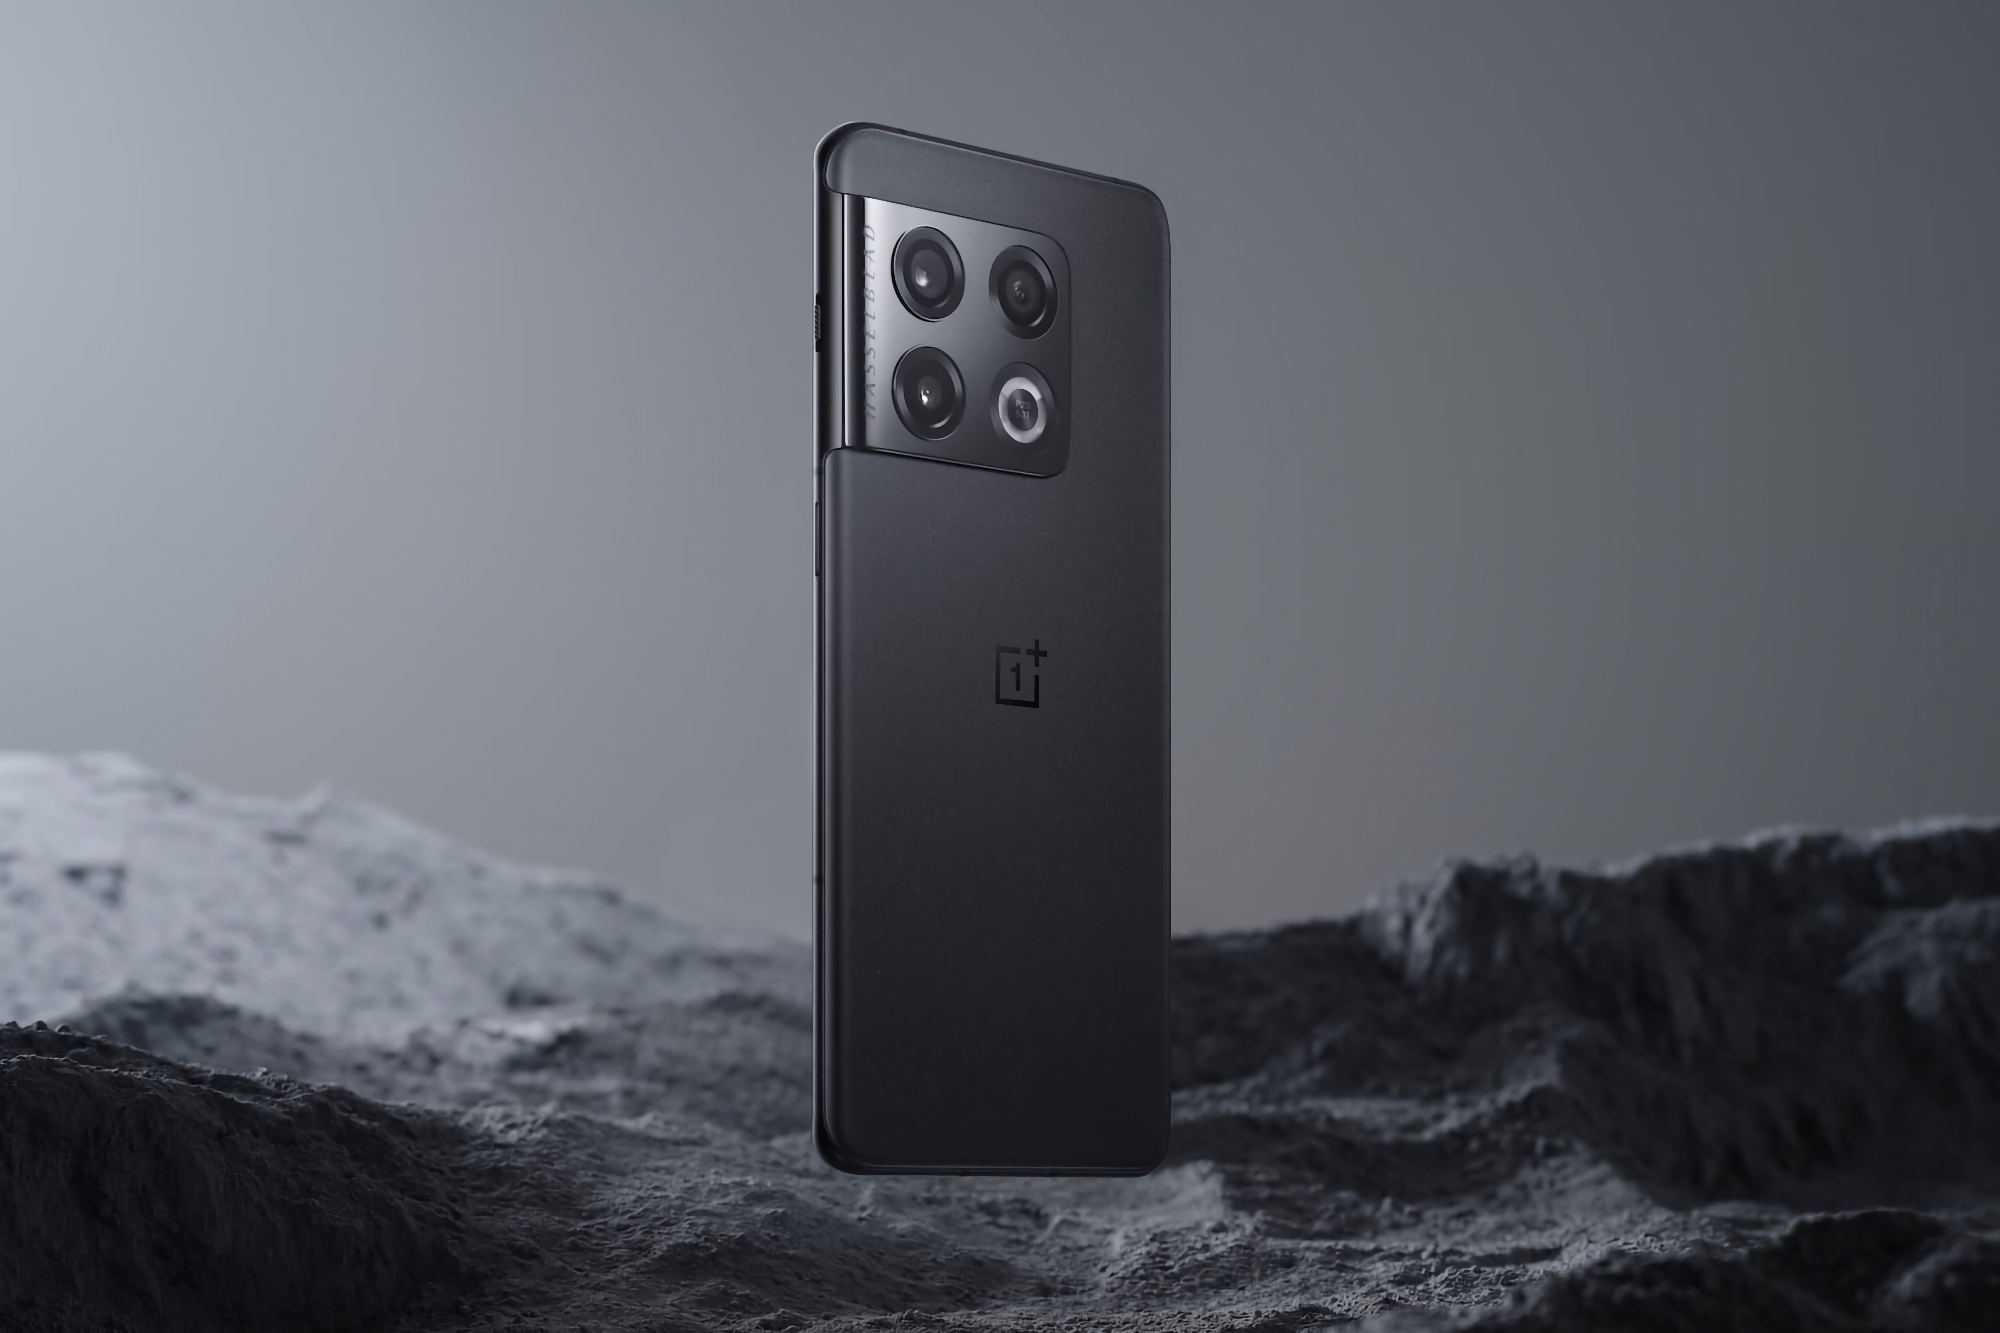 Discount $200: OnePlus dropped the price of the flagship smartphone OnePlus 10 Pro with Snapdragon 8 Gen 1 chip and a Hasselblad camera